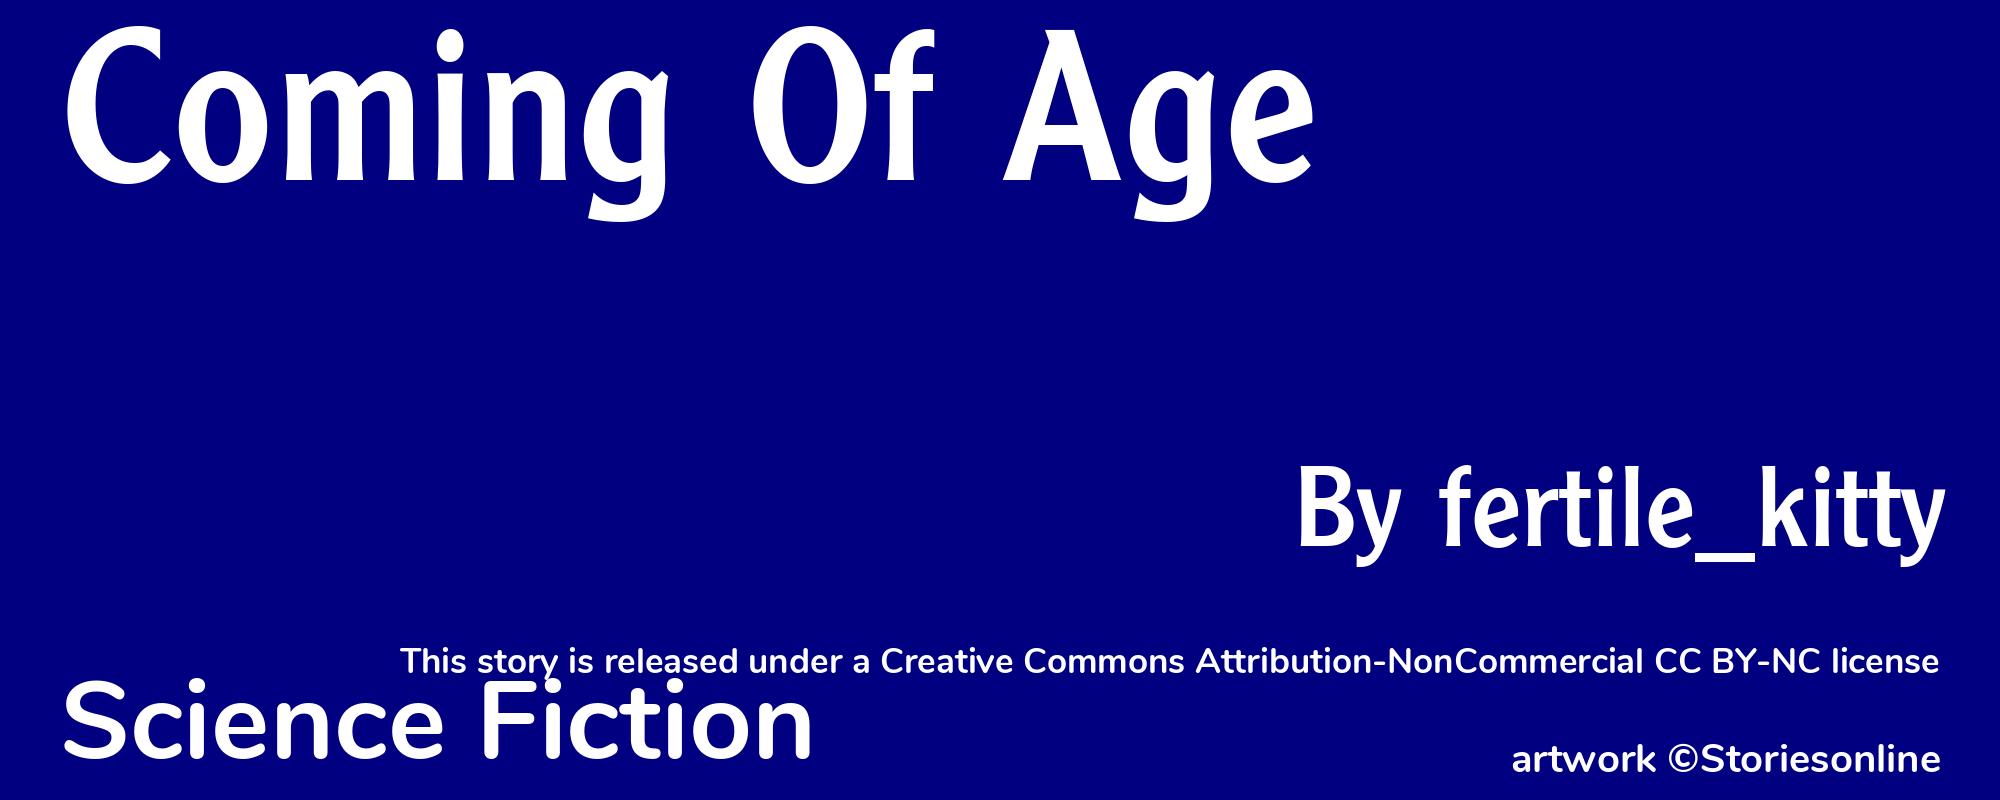 Coming Of Age - Cover